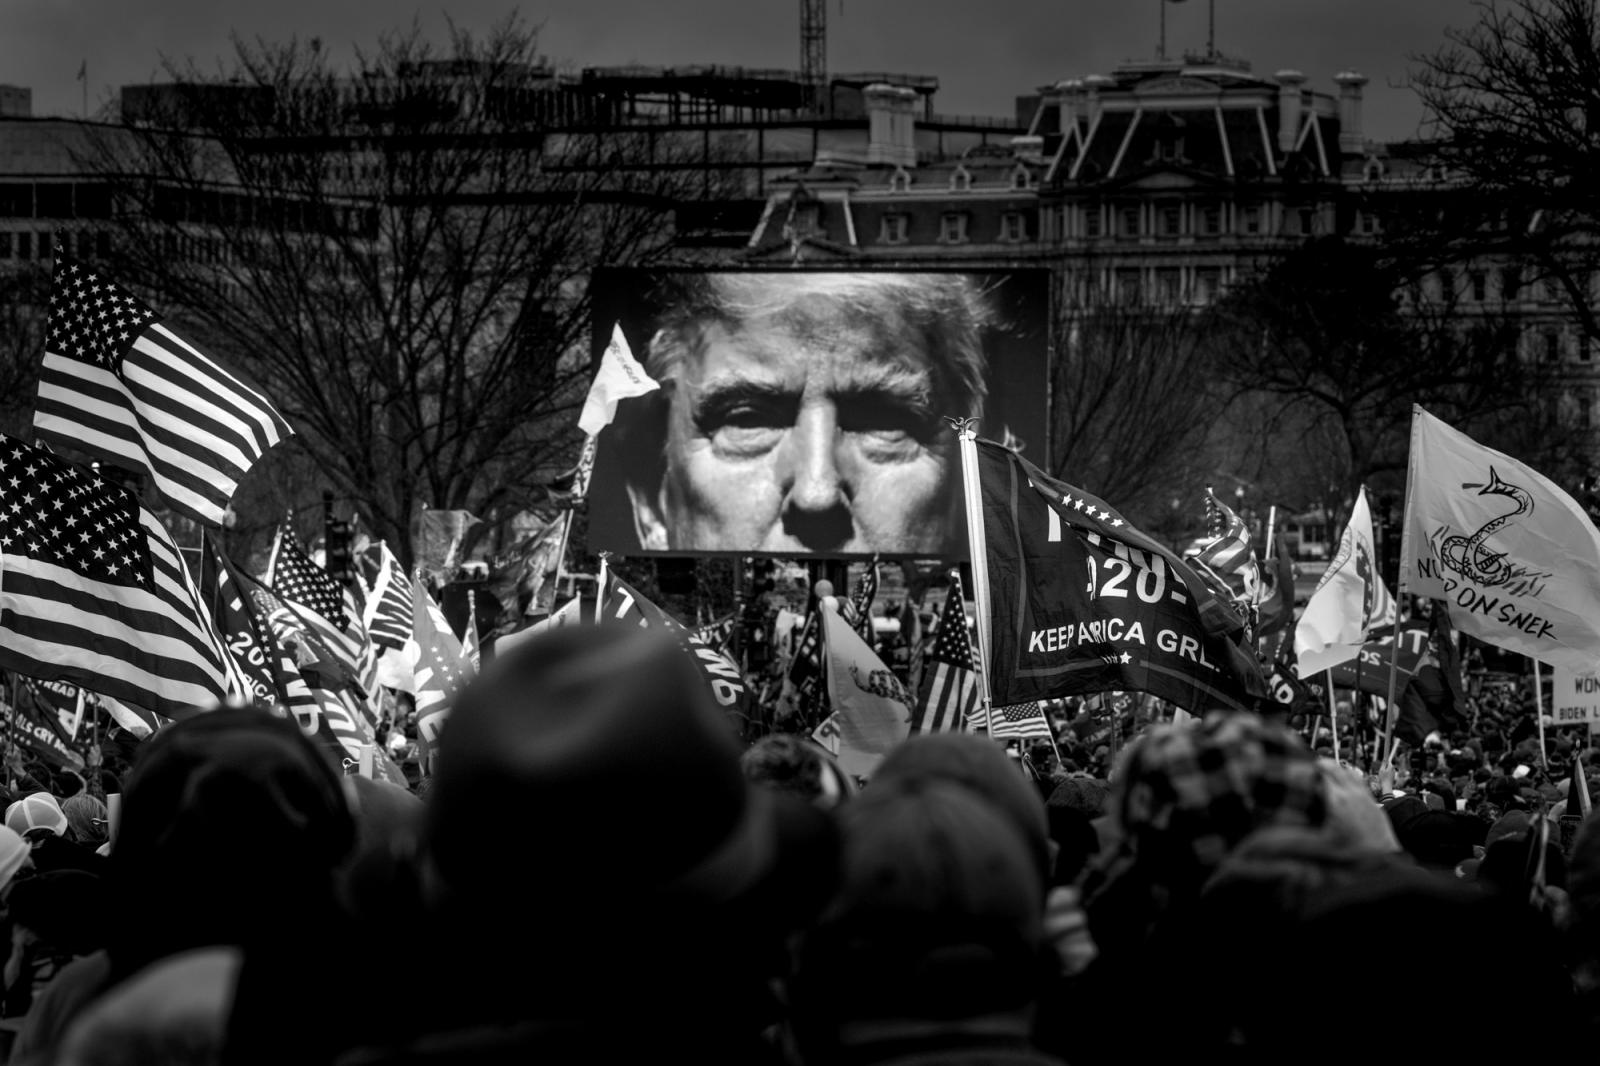 USA, Washington DC, January 6, 2021. President Trump&#39;s image is projected on the screen at the Save America rally near the Washington Monument which later ended in violence at the Capitol. Photo Nina Berman/NOOR